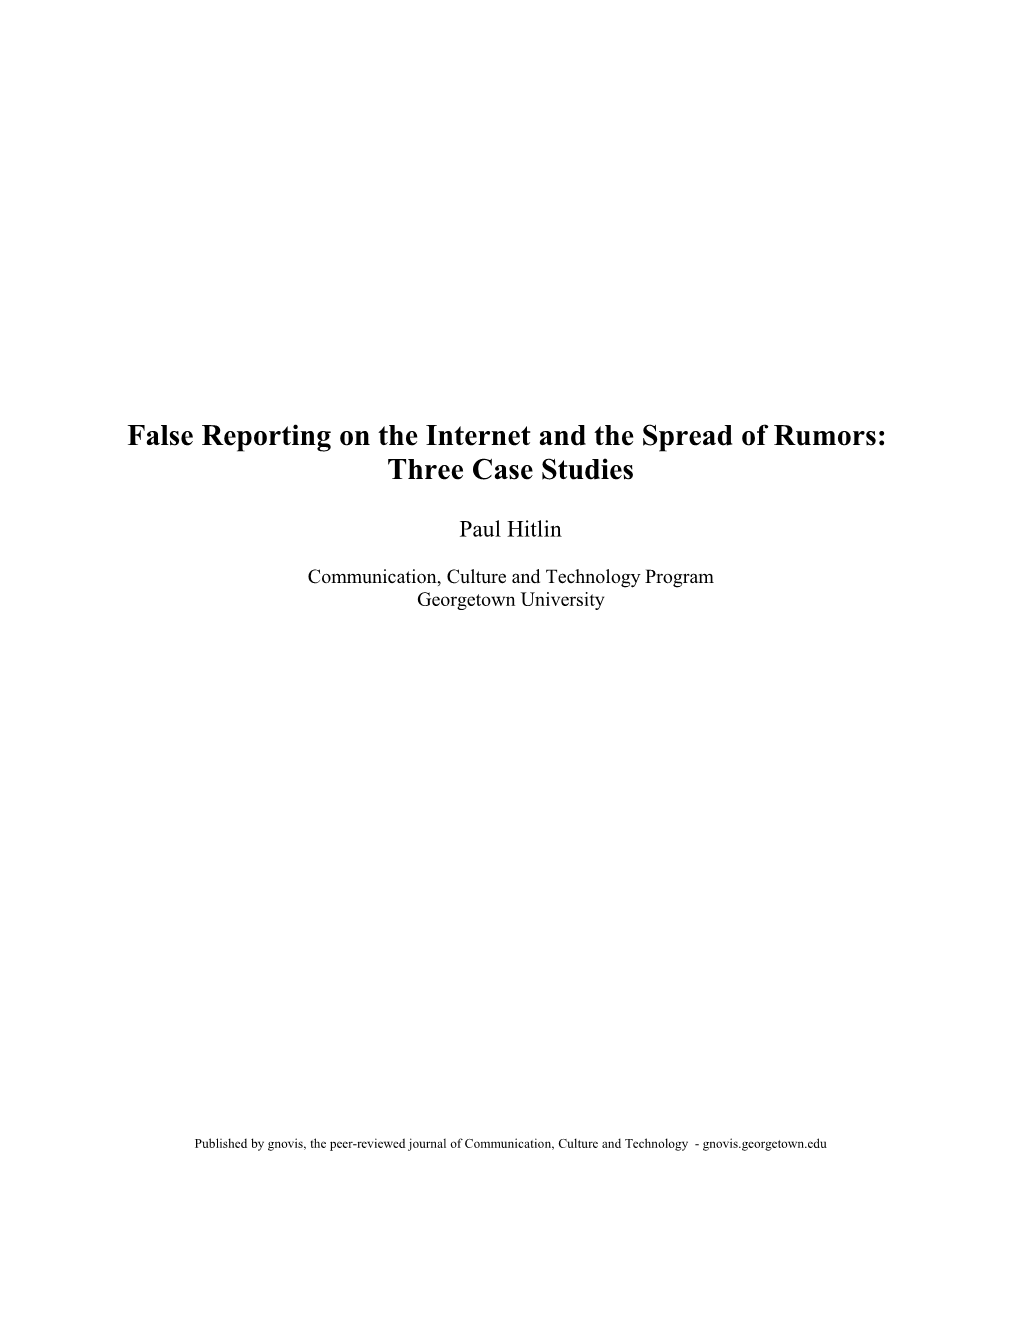 False Reporting on the Internet and the Spread of Rumors: Three Case Studies